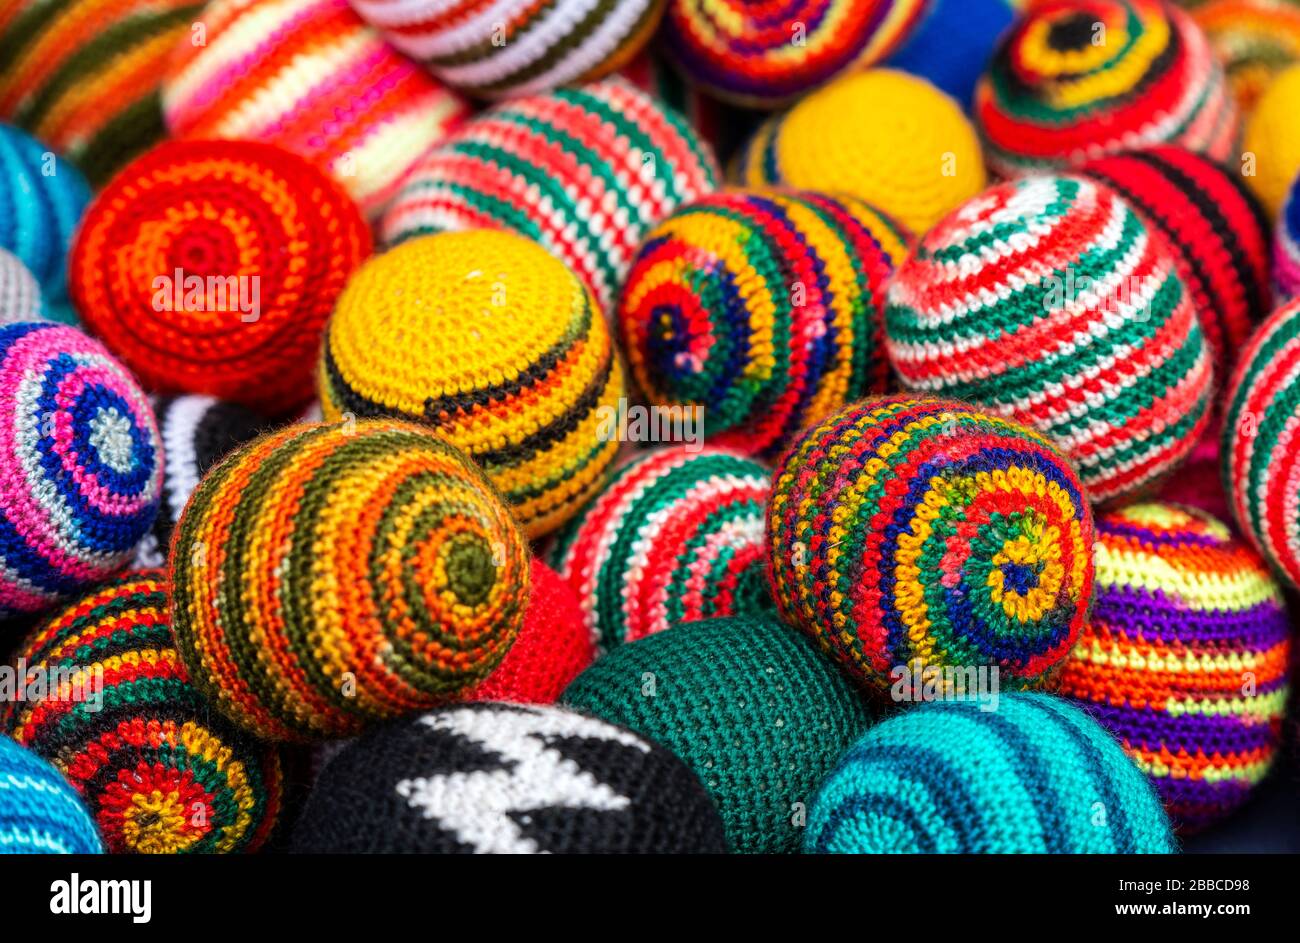 Side view of colorful fabric balls of wool on the Andean craft market of Otavalo, north of Quito, Ecuador. Stock Photo